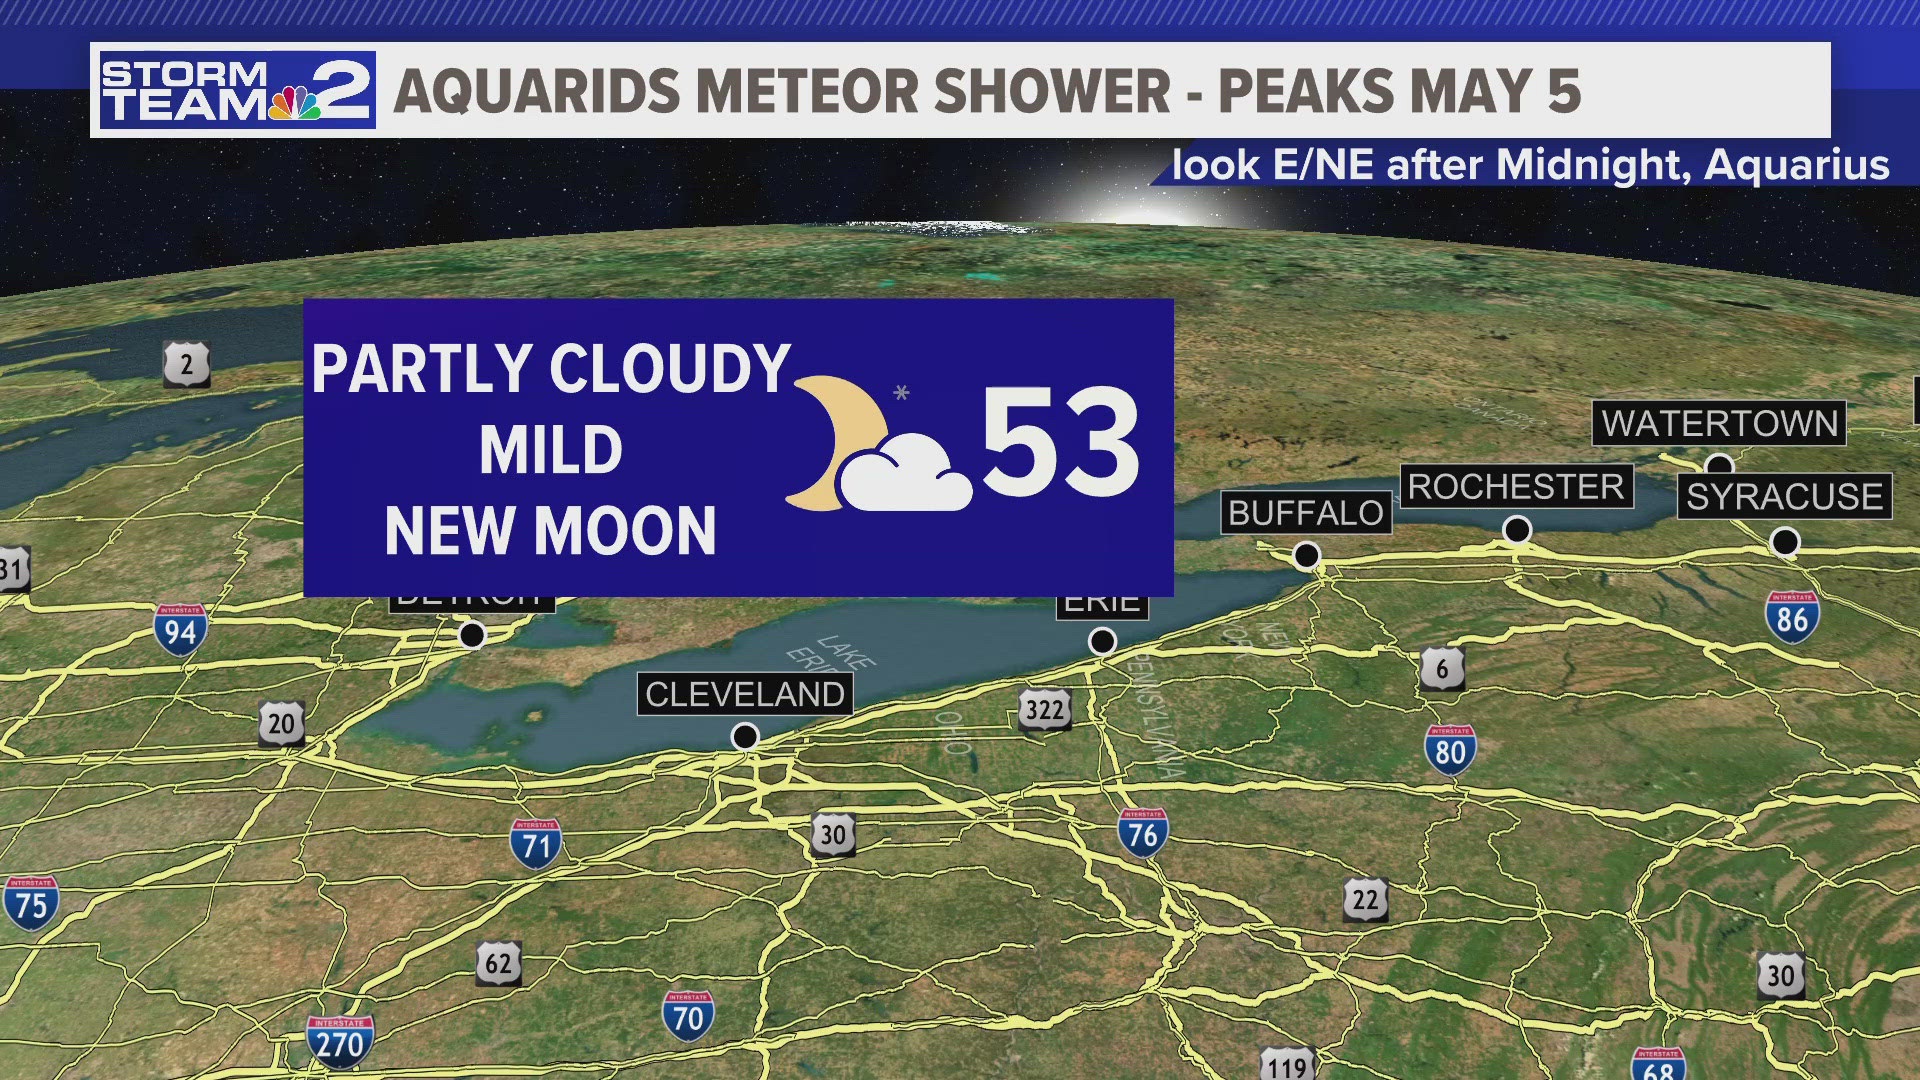 Rounds of rain but some partial clearing at times for a meteor shower peaking this weekend.